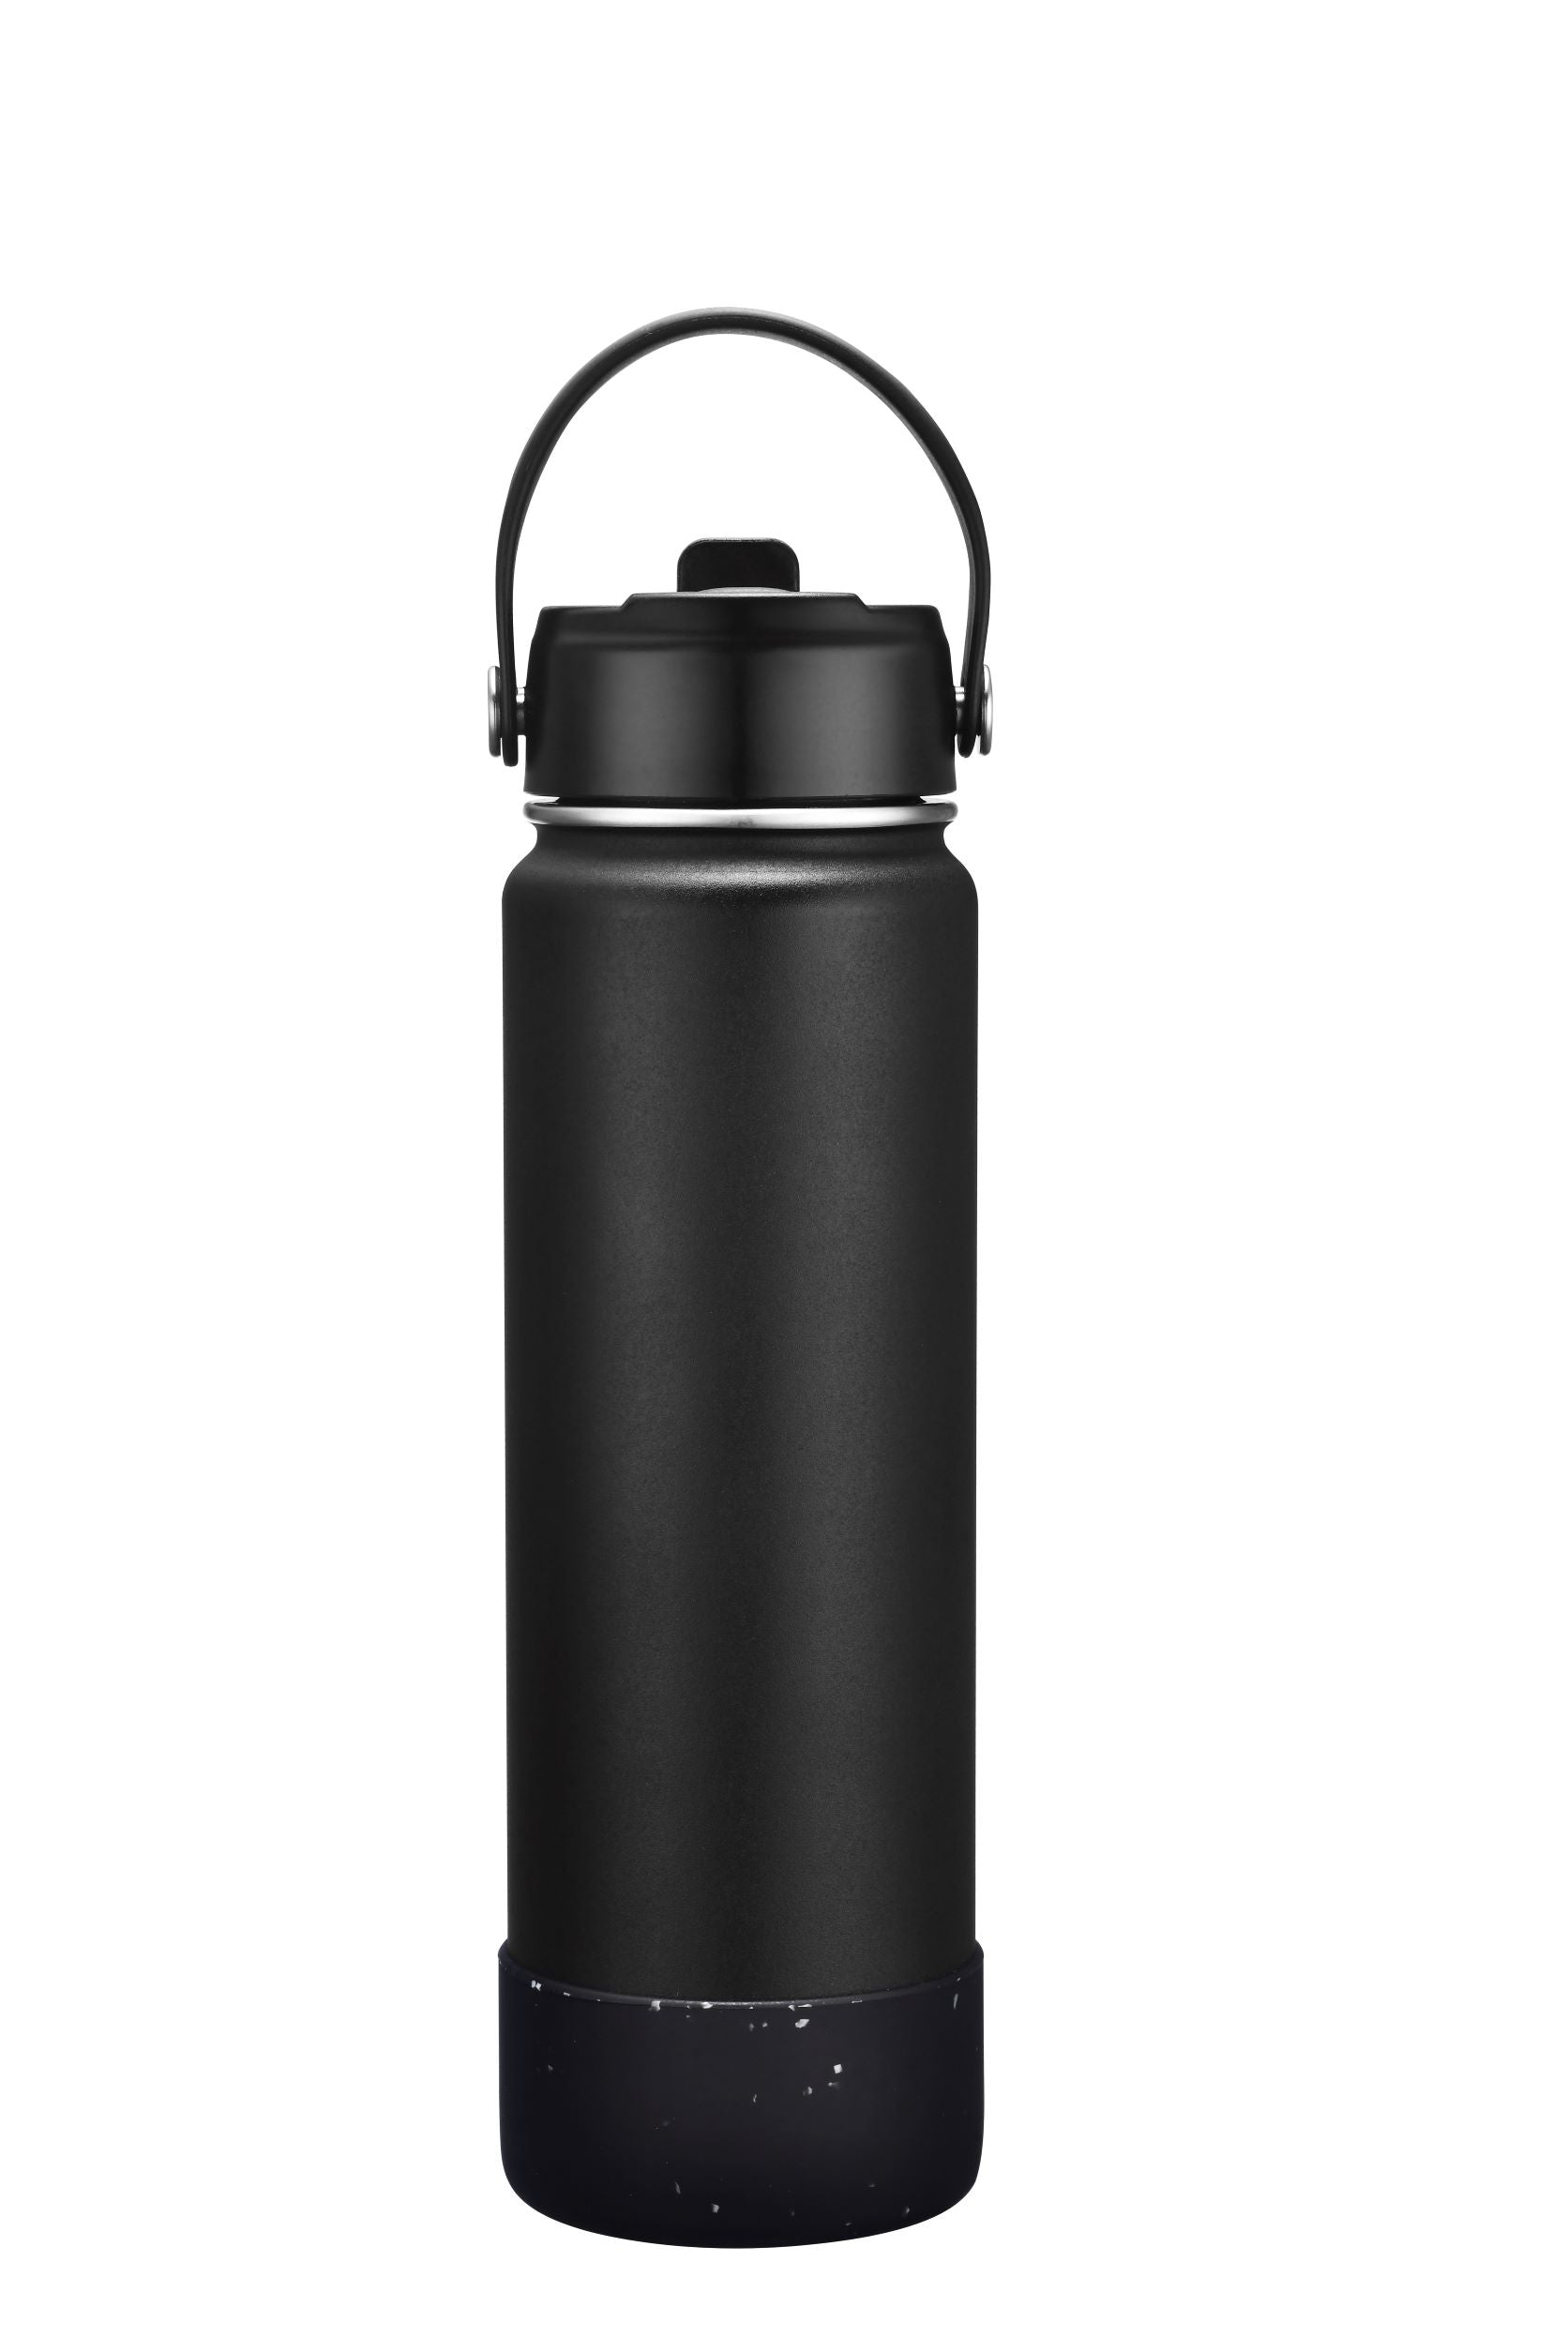 LS-908 - 27oz Vacuum Water Bottle with Silicone Bottom